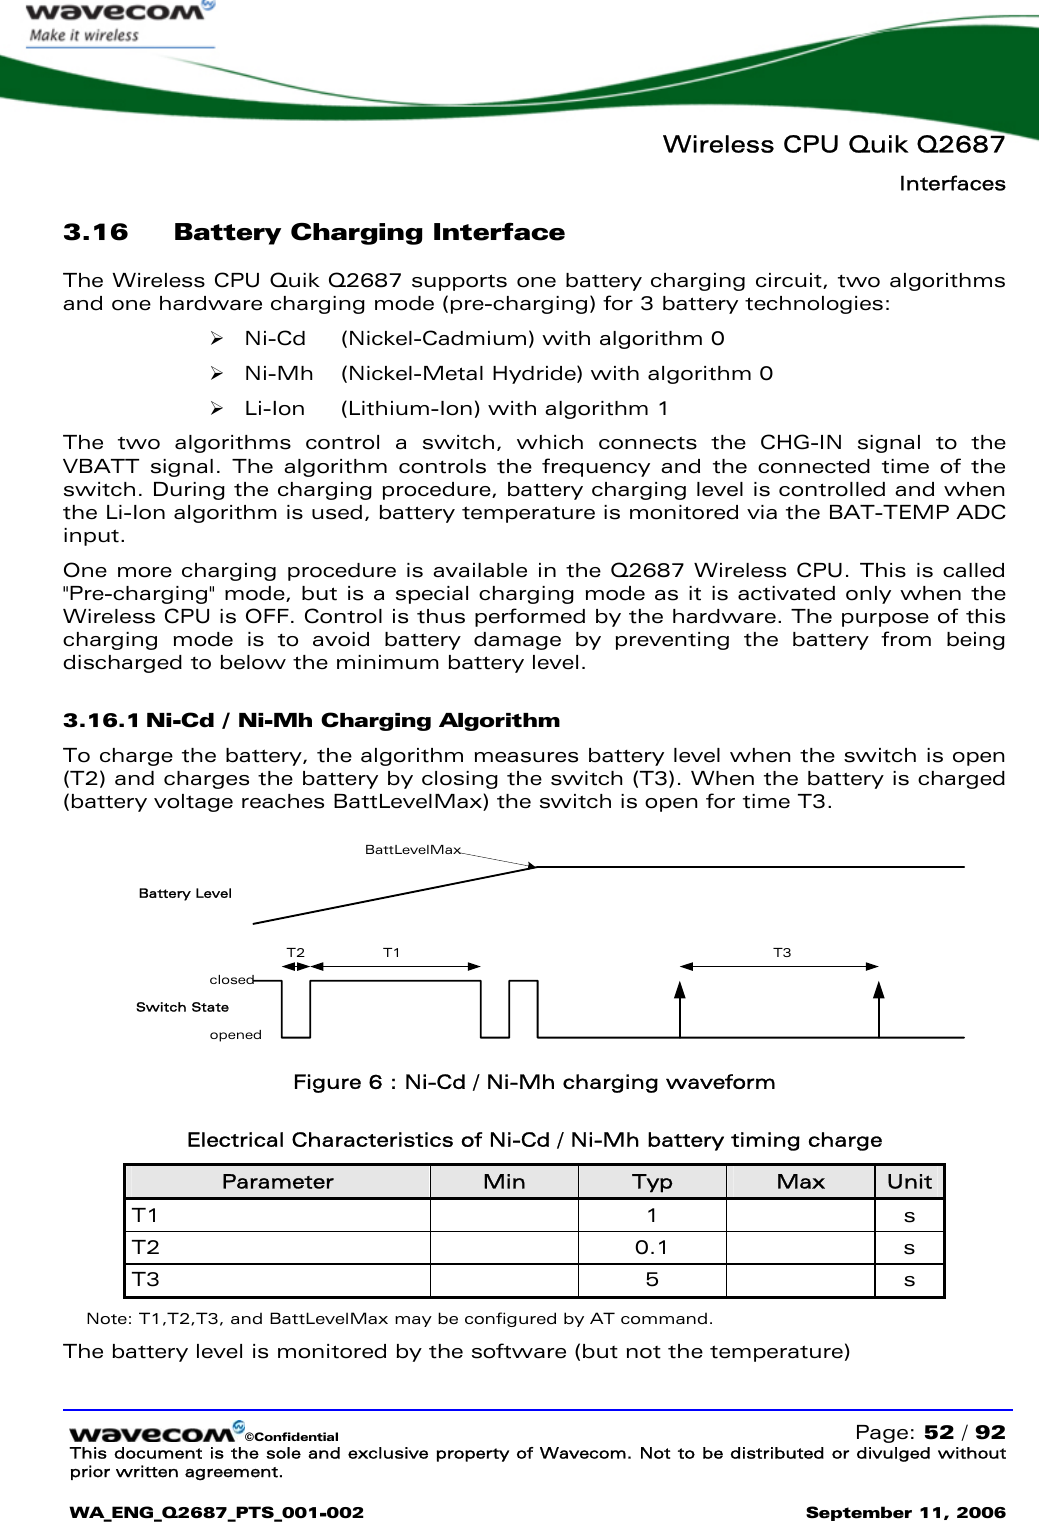   Wireless CPU Quik Q2687 Interfaces   ©Confidential   Page: 52 / 92 This document is the sole and exclusive property of Wavecom. Not to be distributed or divulged without prior written agreement.  WA_ENG_Q2687_PTS_001-002 September 11, 2006   3.16 Battery Charging Interface The Wireless CPU Quik Q2687 supports one battery charging circuit, two algorithms and one hardware charging mode (pre-charging) for 3 battery technologies: ¾ Ni-Cd   (Nickel-Cadmium) with algorithm 0 ¾ Ni-Mh   (Nickel-Metal Hydride) with algorithm 0 ¾ Li-Ion   (Lithium-Ion) with algorithm 1 The two algorithms control a switch, which connects the CHG-IN signal to the VBATT signal. The algorithm controls the frequency and the connected time of the switch. During the charging procedure, battery charging level is controlled and when the Li-Ion algorithm is used, battery temperature is monitored via the BAT-TEMP ADC input. One more charging procedure is available in the Q2687 Wireless CPU. This is called &quot;Pre-charging&quot; mode, but is a special charging mode as it is activated only when the Wireless CPU is OFF. Control is thus performed by the hardware. The purpose of this charging mode is to avoid battery damage by preventing the battery from being discharged to below the minimum battery level. 3.16.1 Ni-Cd / Ni-Mh Charging Algorithm To charge the battery, the algorithm measures battery level when the switch is open (T2) and charges the battery by closing the switch (T3). When the battery is charged (battery voltage reaches BattLevelMax) the switch is open for time T3.  BattLevelMaxT1T2 T3Battery LevelSwitch Stateopenedclosed Figure 6 : Ni-Cd / Ni-Mh charging waveform  Electrical Characteristics of Ni-Cd / Ni-Mh battery timing charge Parameter  Min  Typ  Max  Unit T1   1  s T2   0.1  s T3   5  s Note: T1,T2,T3, and BattLevelMax may be configured by AT command. The battery level is monitored by the software (but not the temperature) 